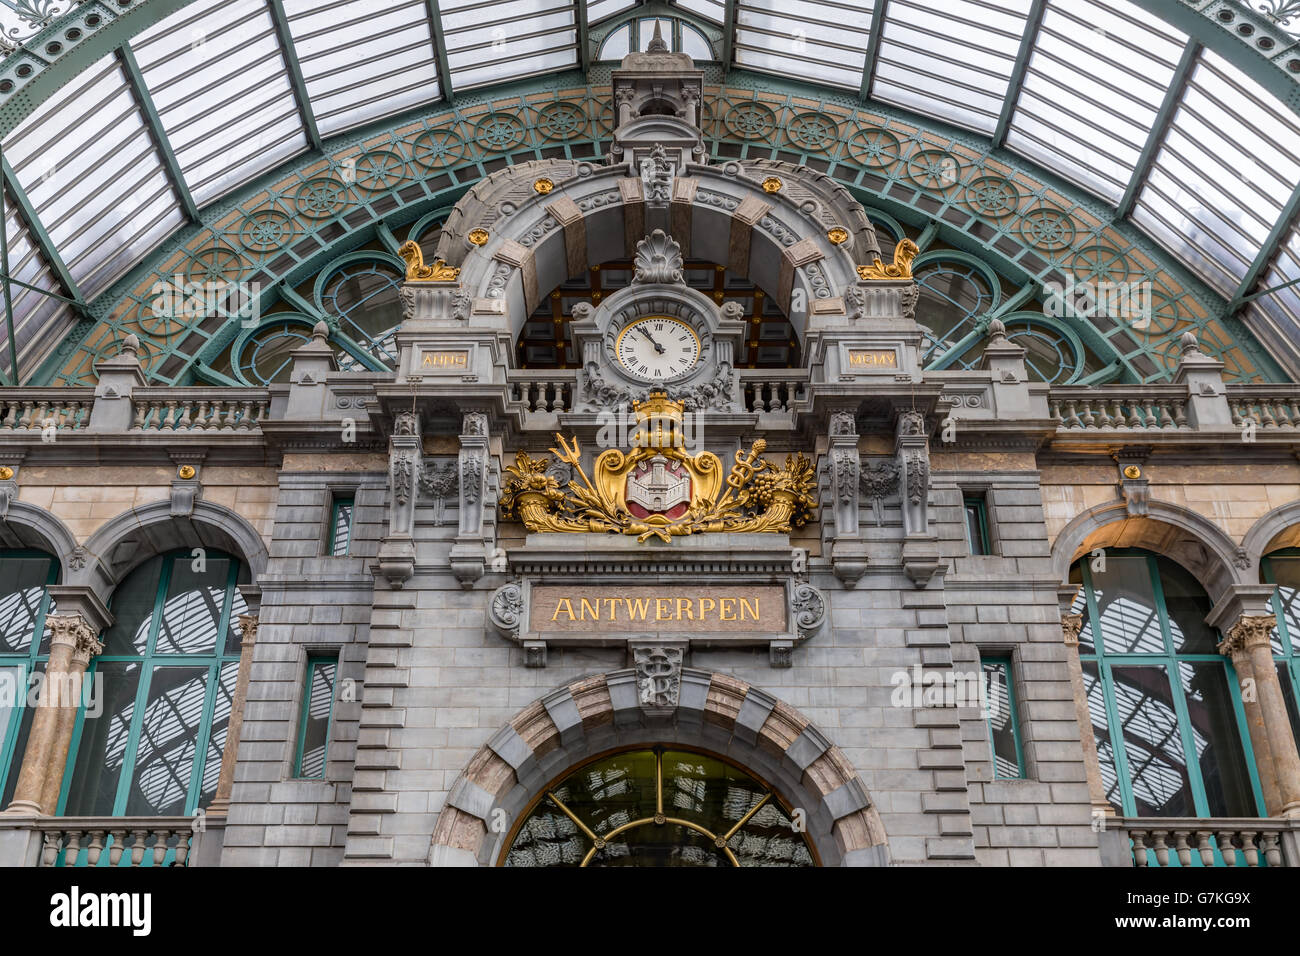 Main hall with clock and cityname 'Antwerpen' and dutch 'exit'sign of famous art deco station of Antwerp, Belgium Stock Photo